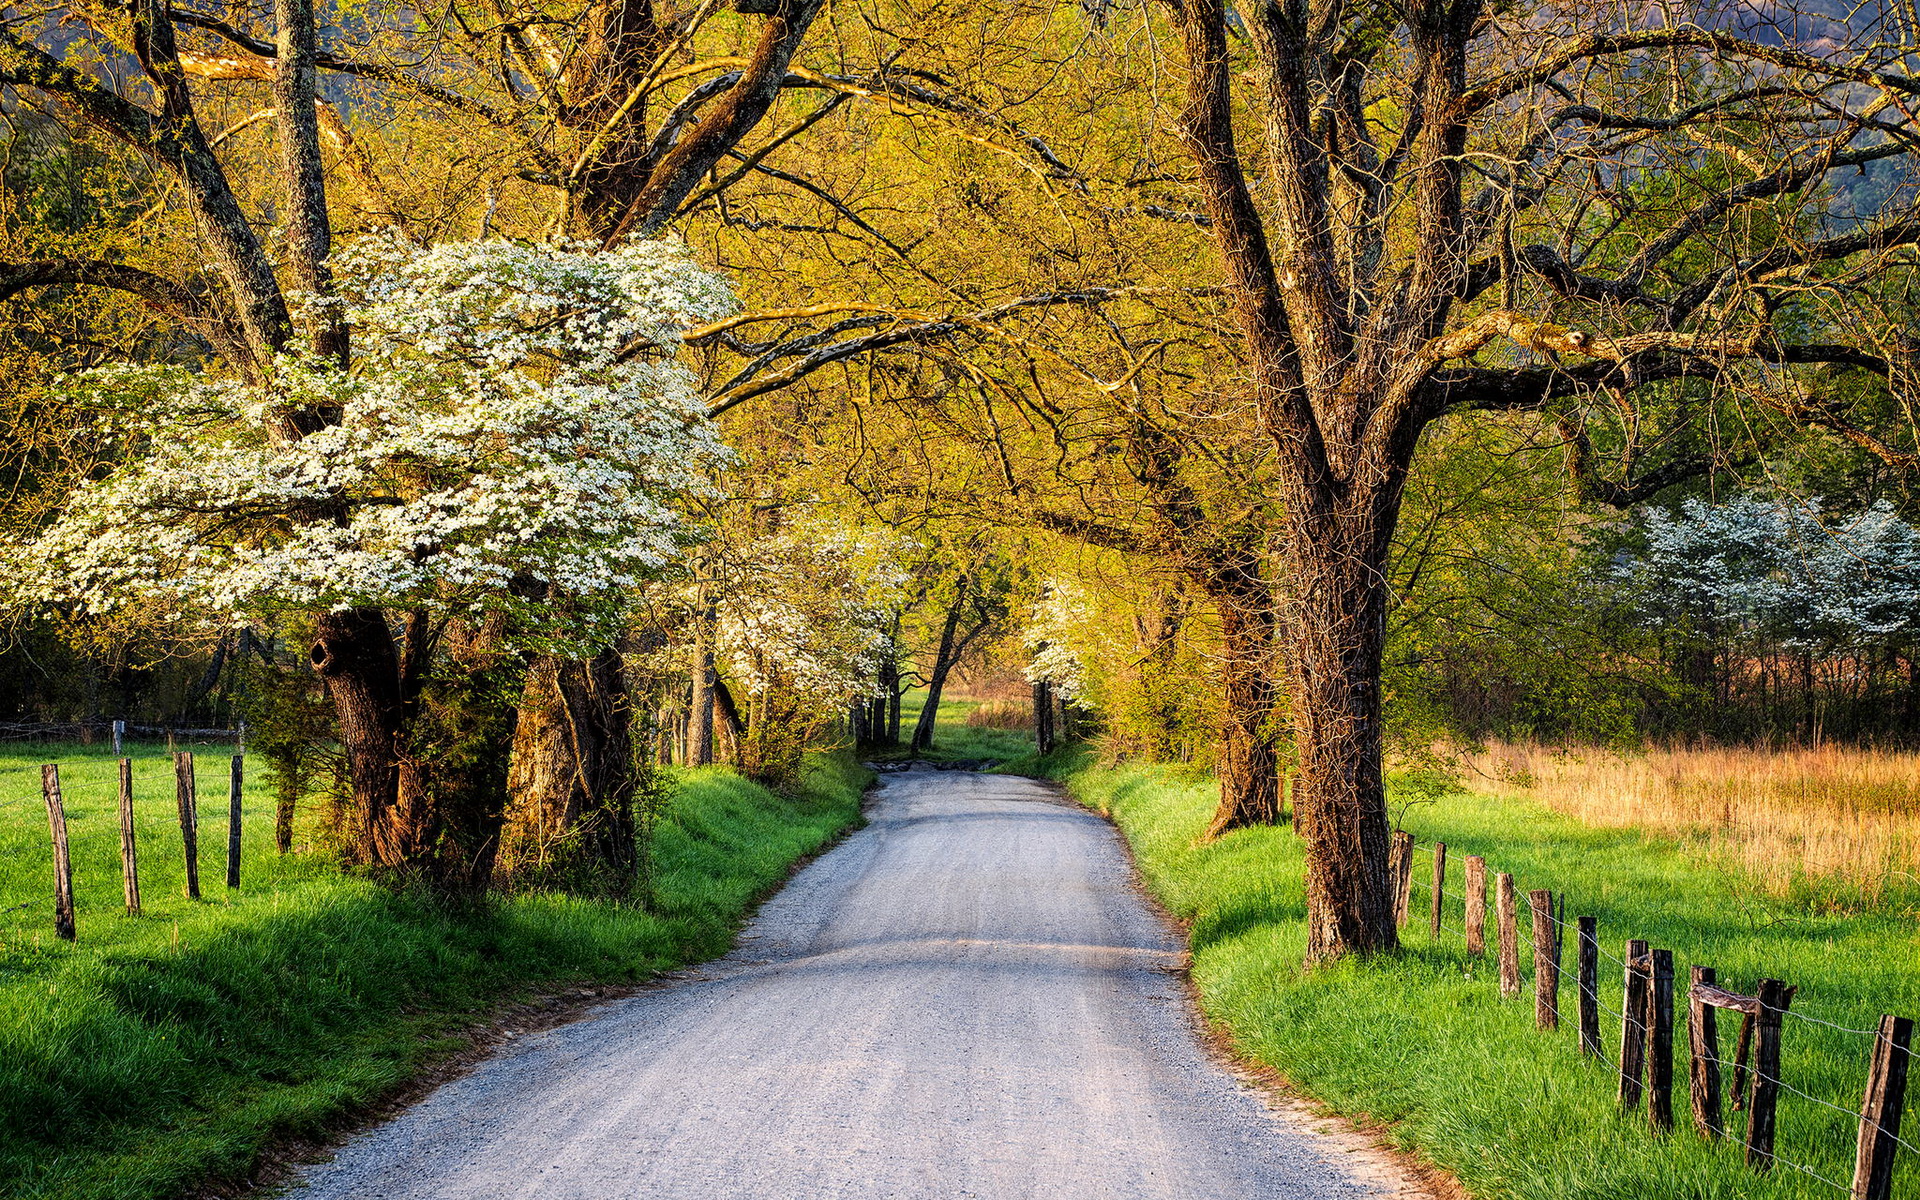 spring, country, man made, road, blossom, tree